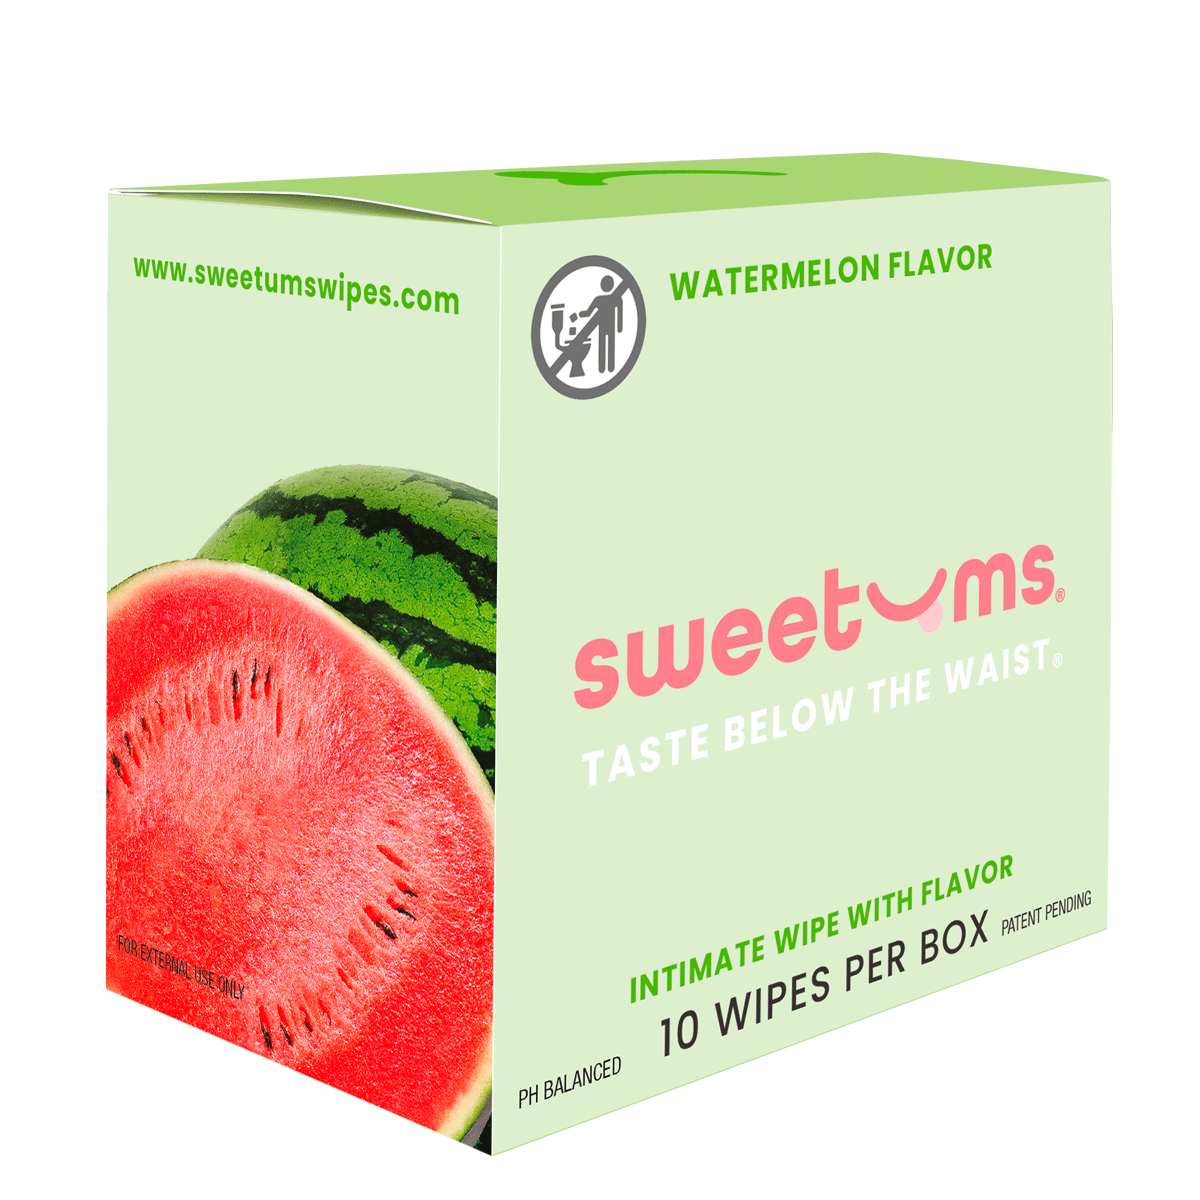 Sweetums flavored Wipes for Women - Watermelon